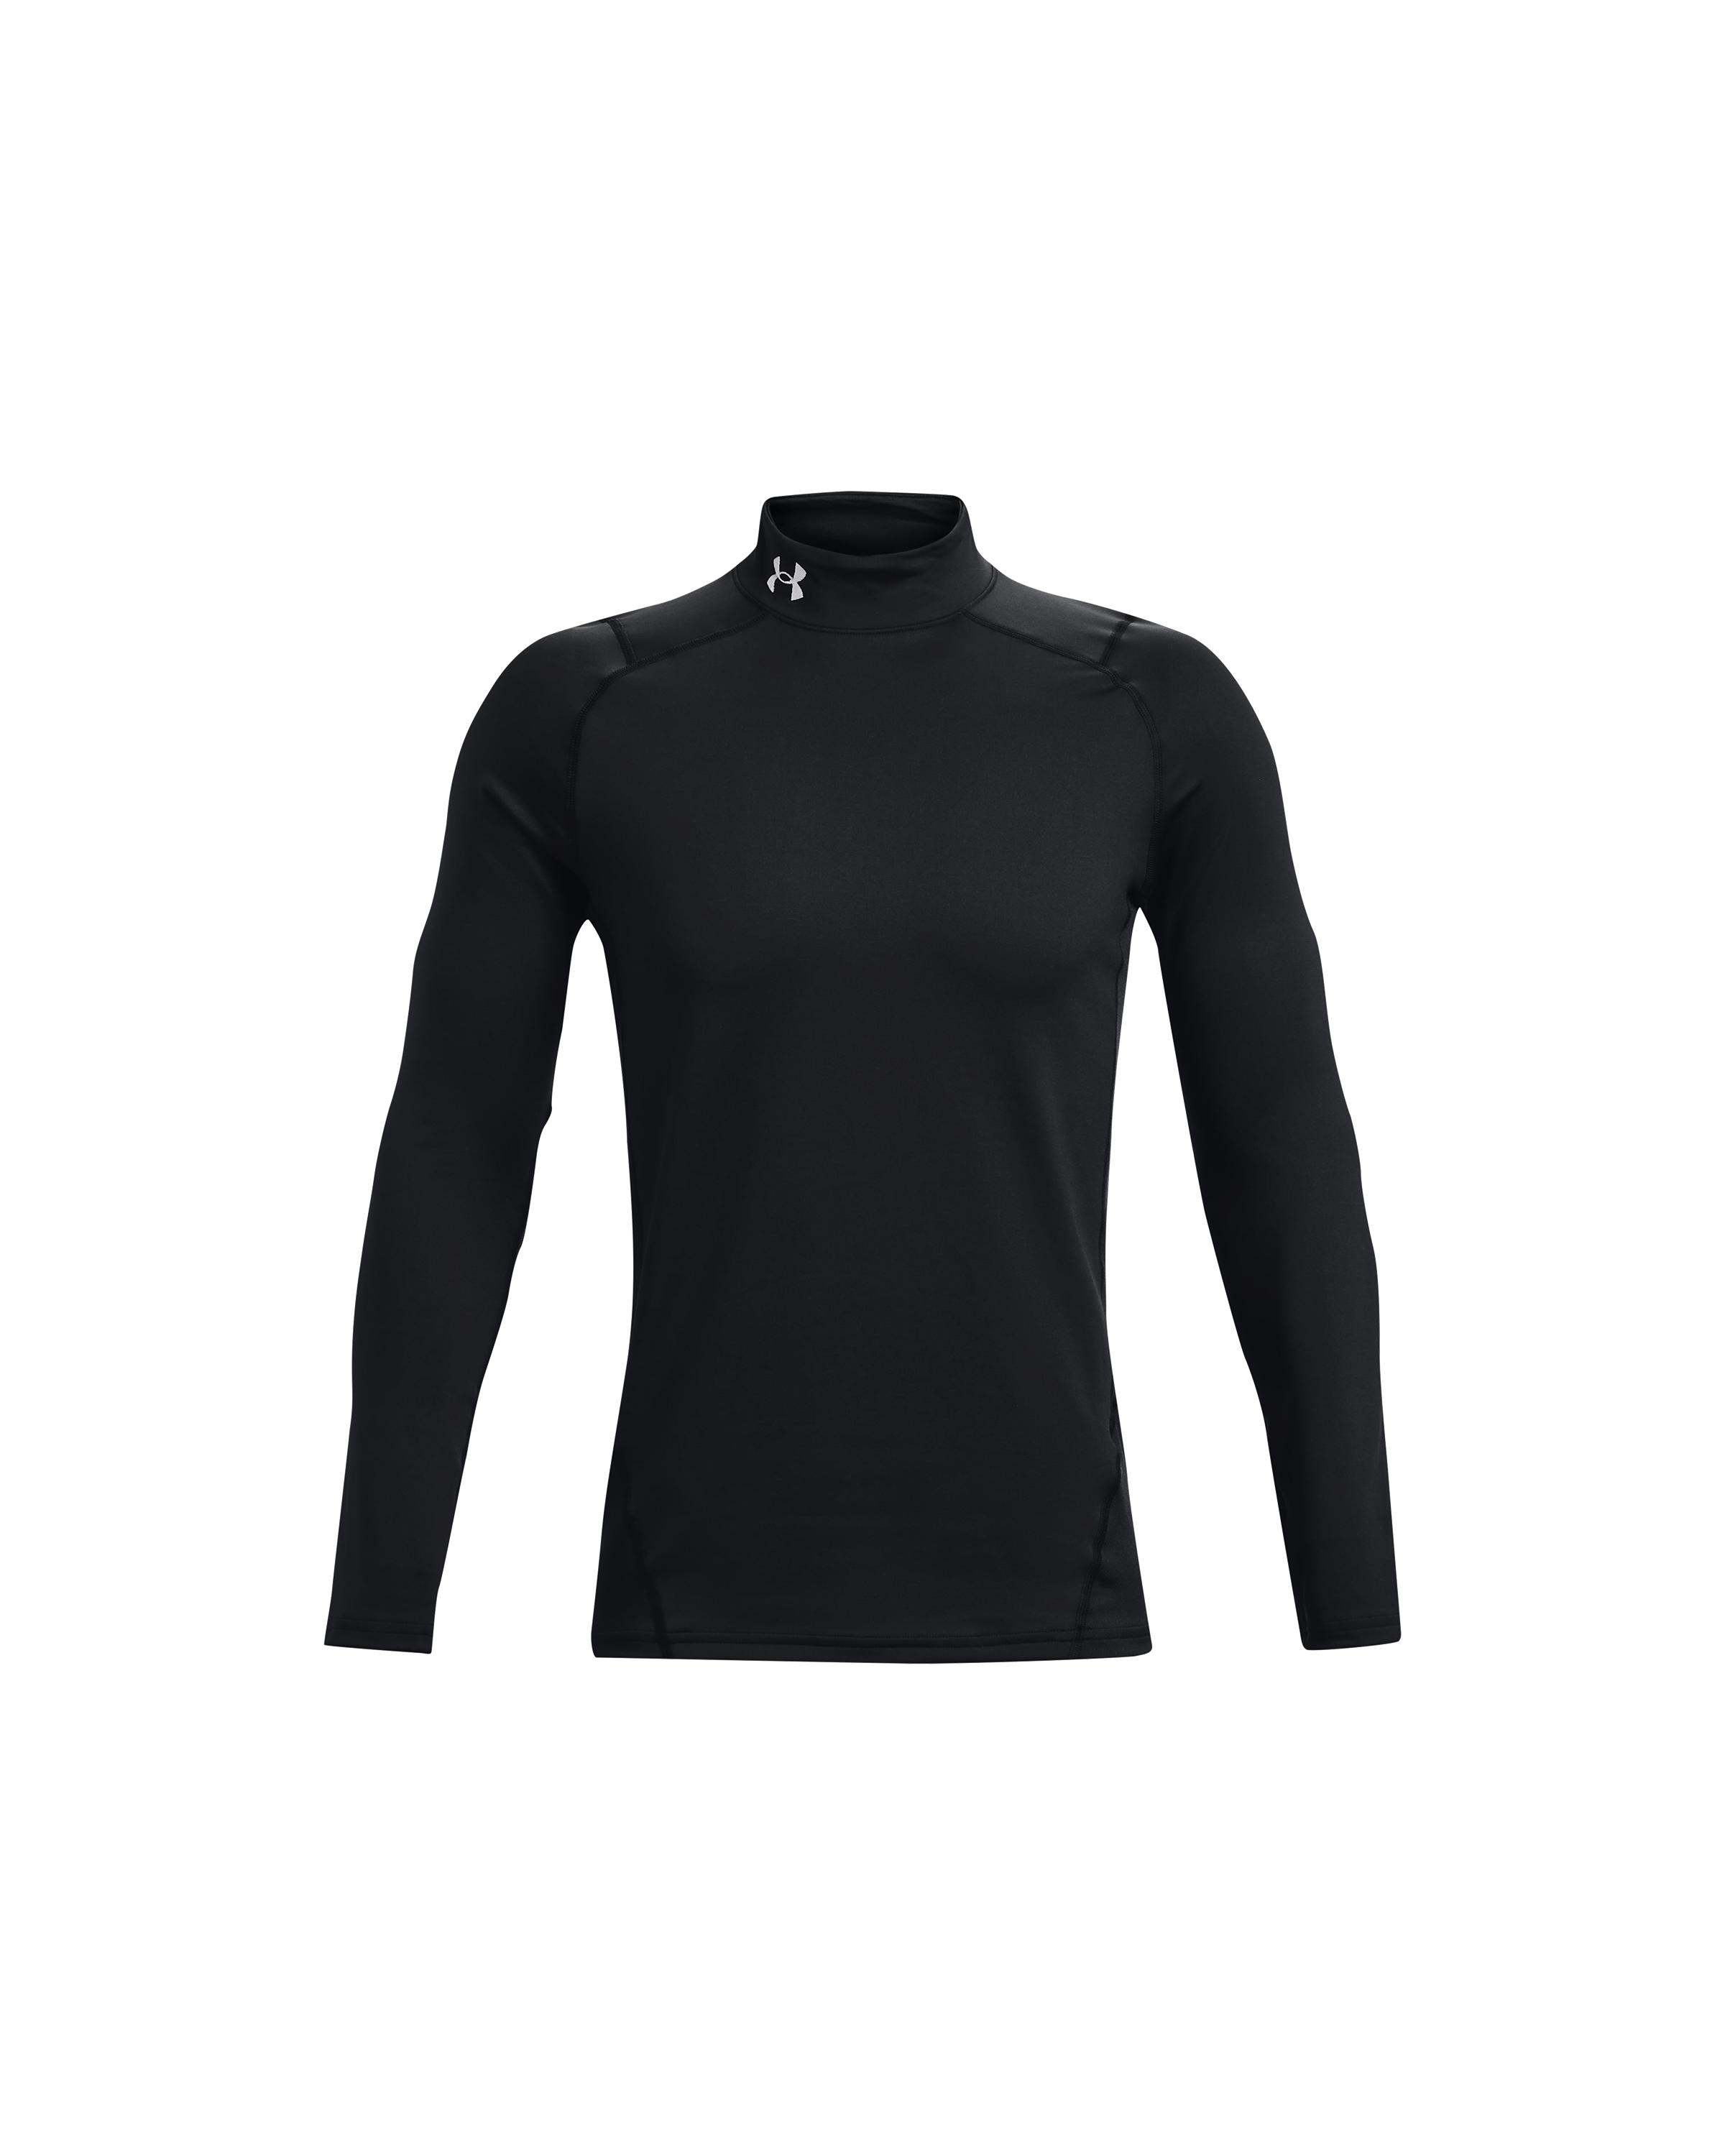 Men's ColdGear Armour Fitted Crew Top from Under Armour